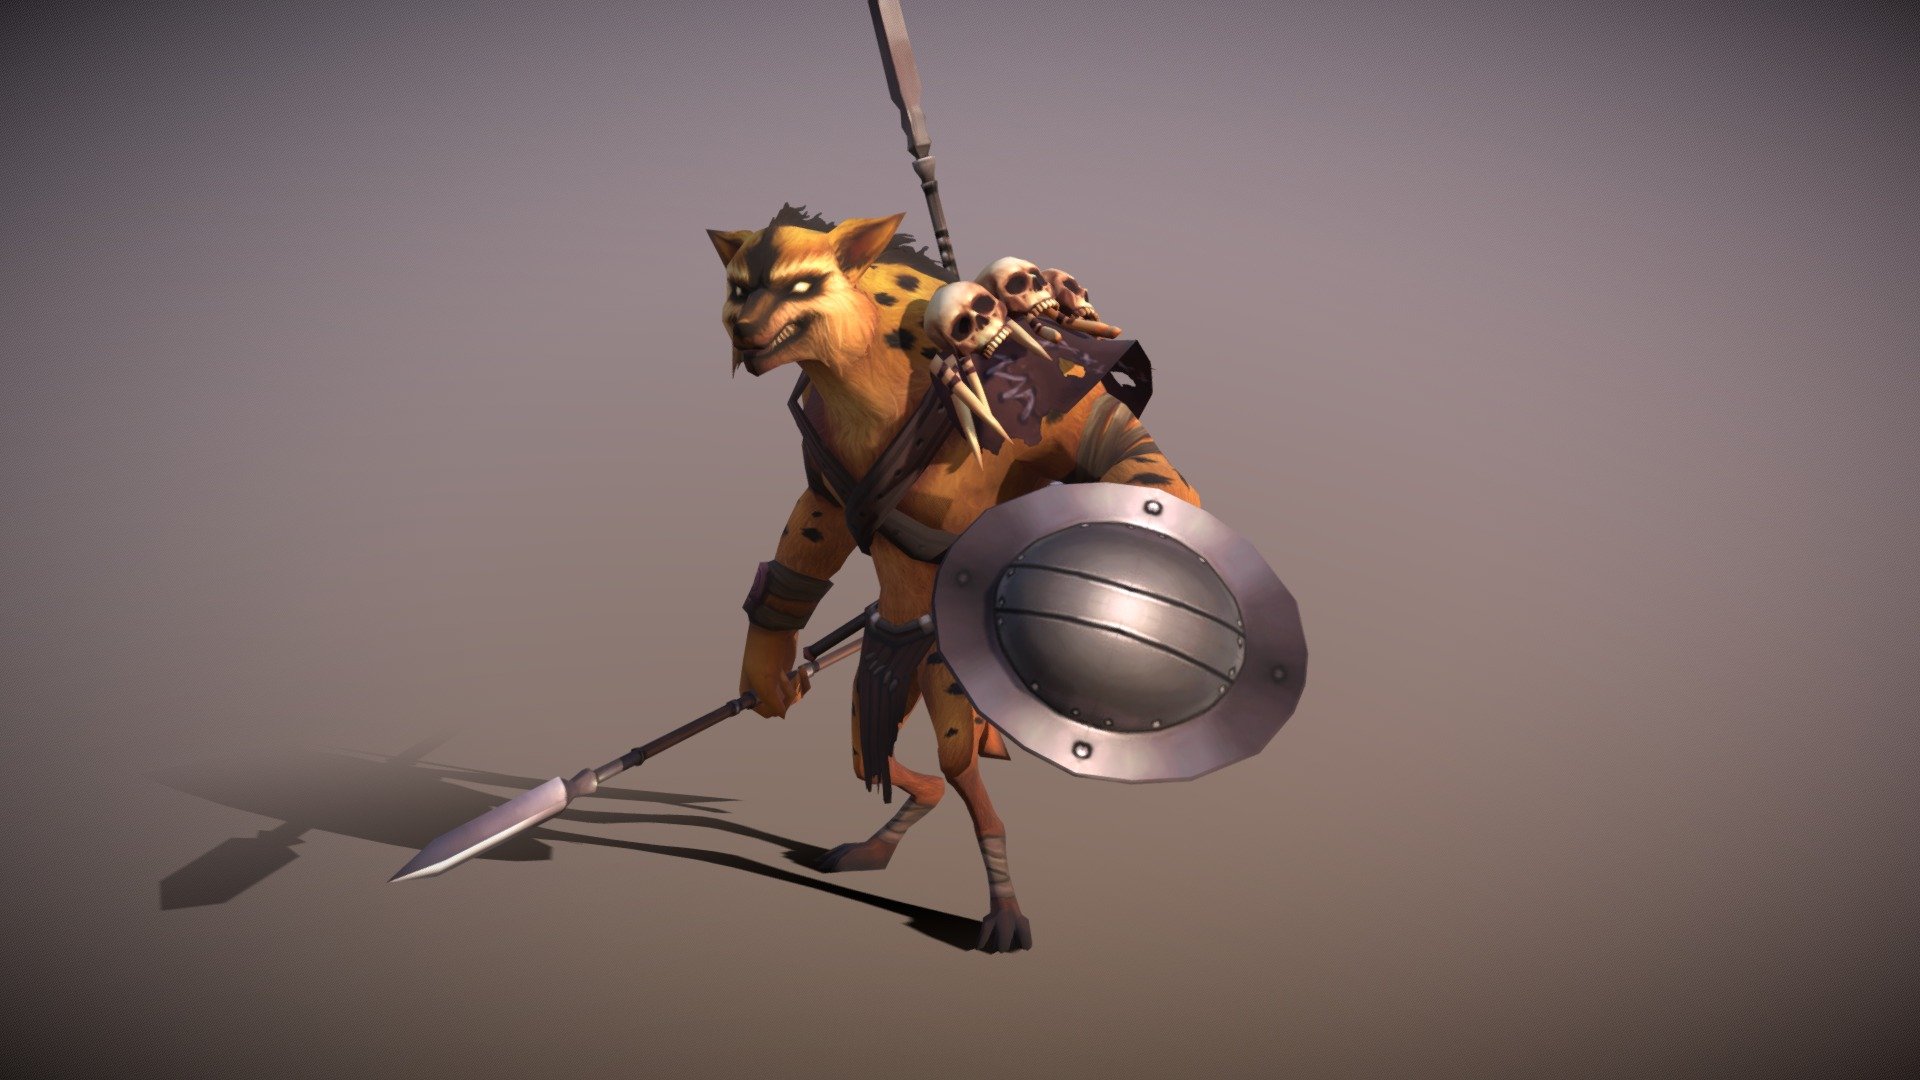 A Jackal Wolf Warrior Asset.

The 3d file format is FBX, if you need 3dMax file format, email me please.

INSIDE:

FBX Model. 7331 triangles.
3 FBX Animations.Idle, Attack, Run.
Diffuse Texture. 1024x1024 resolution 3d model